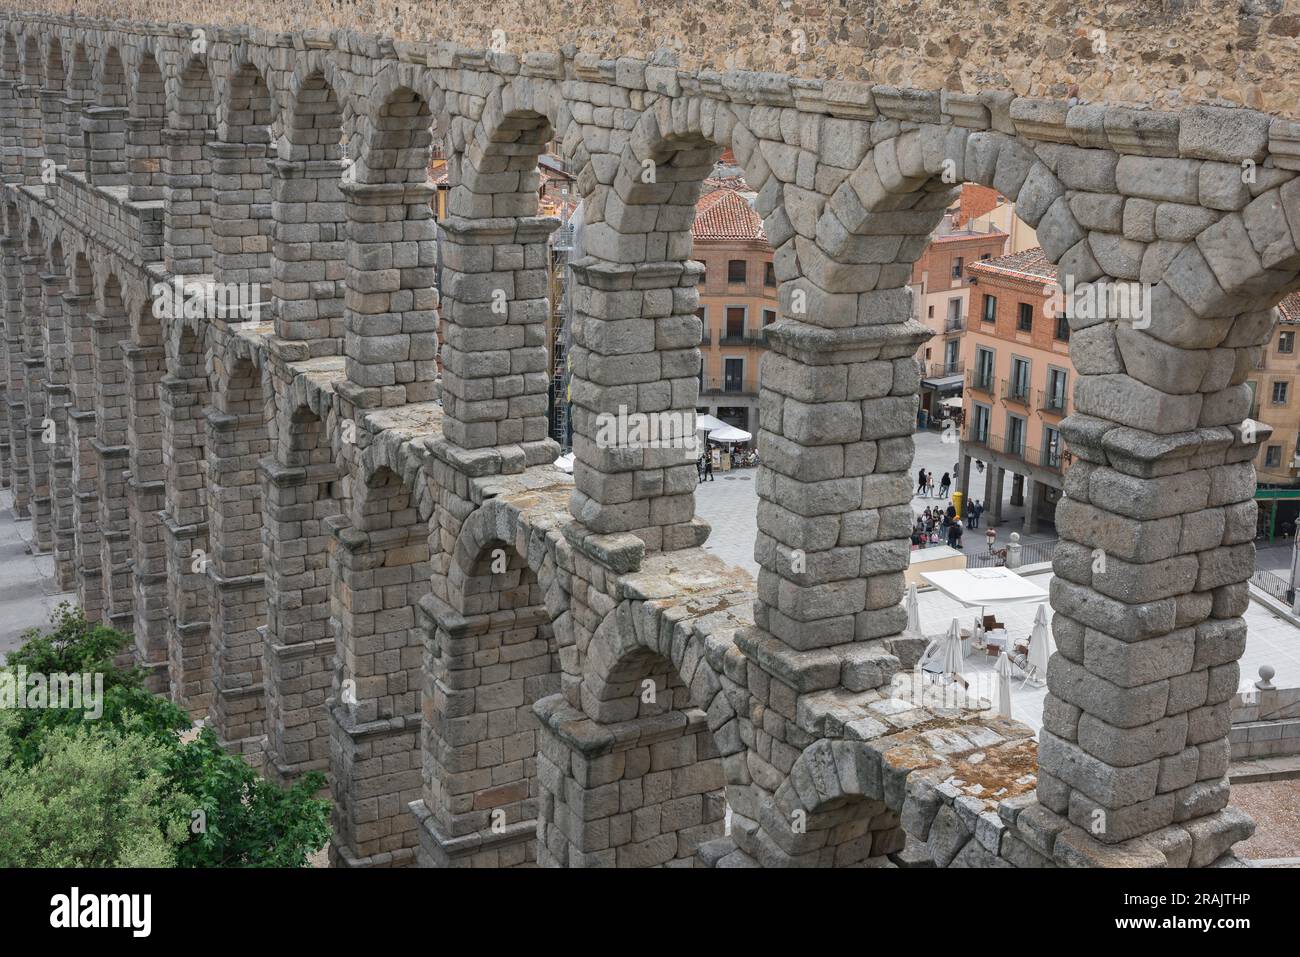 Roman aqueduct, detail of the stone arches of the magnificent 1st Century AD Roman aqueduct spanning the centre of the city of Segovia, Spain Stock Photo